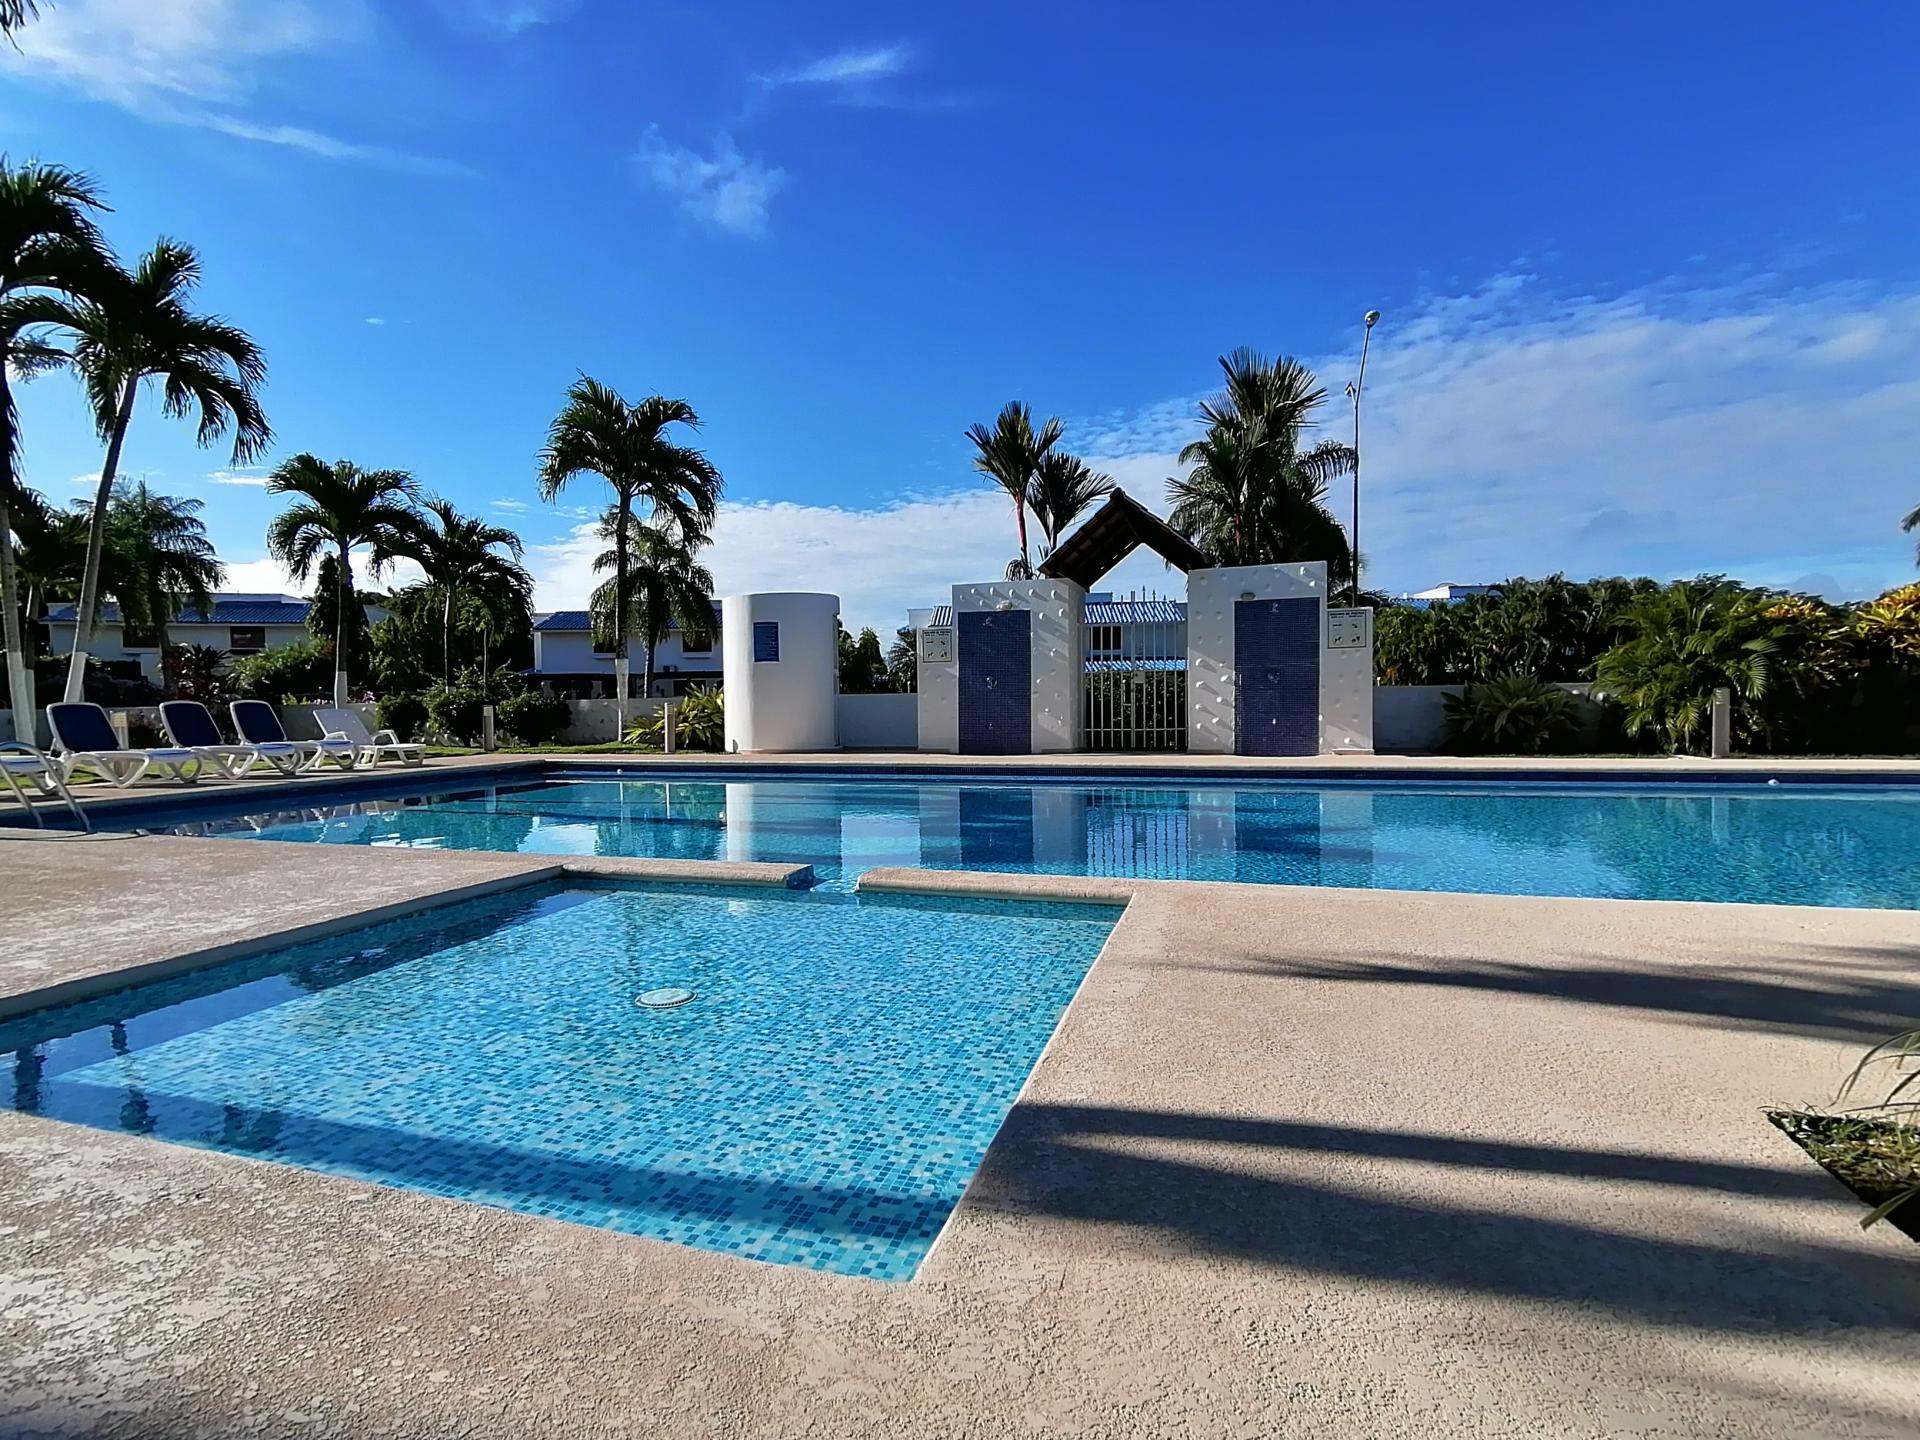 PLAYA BLANCA WATERFRONT APARTMENT 3 BEDROOMS  3 BATHS 132M2 FOR SALE